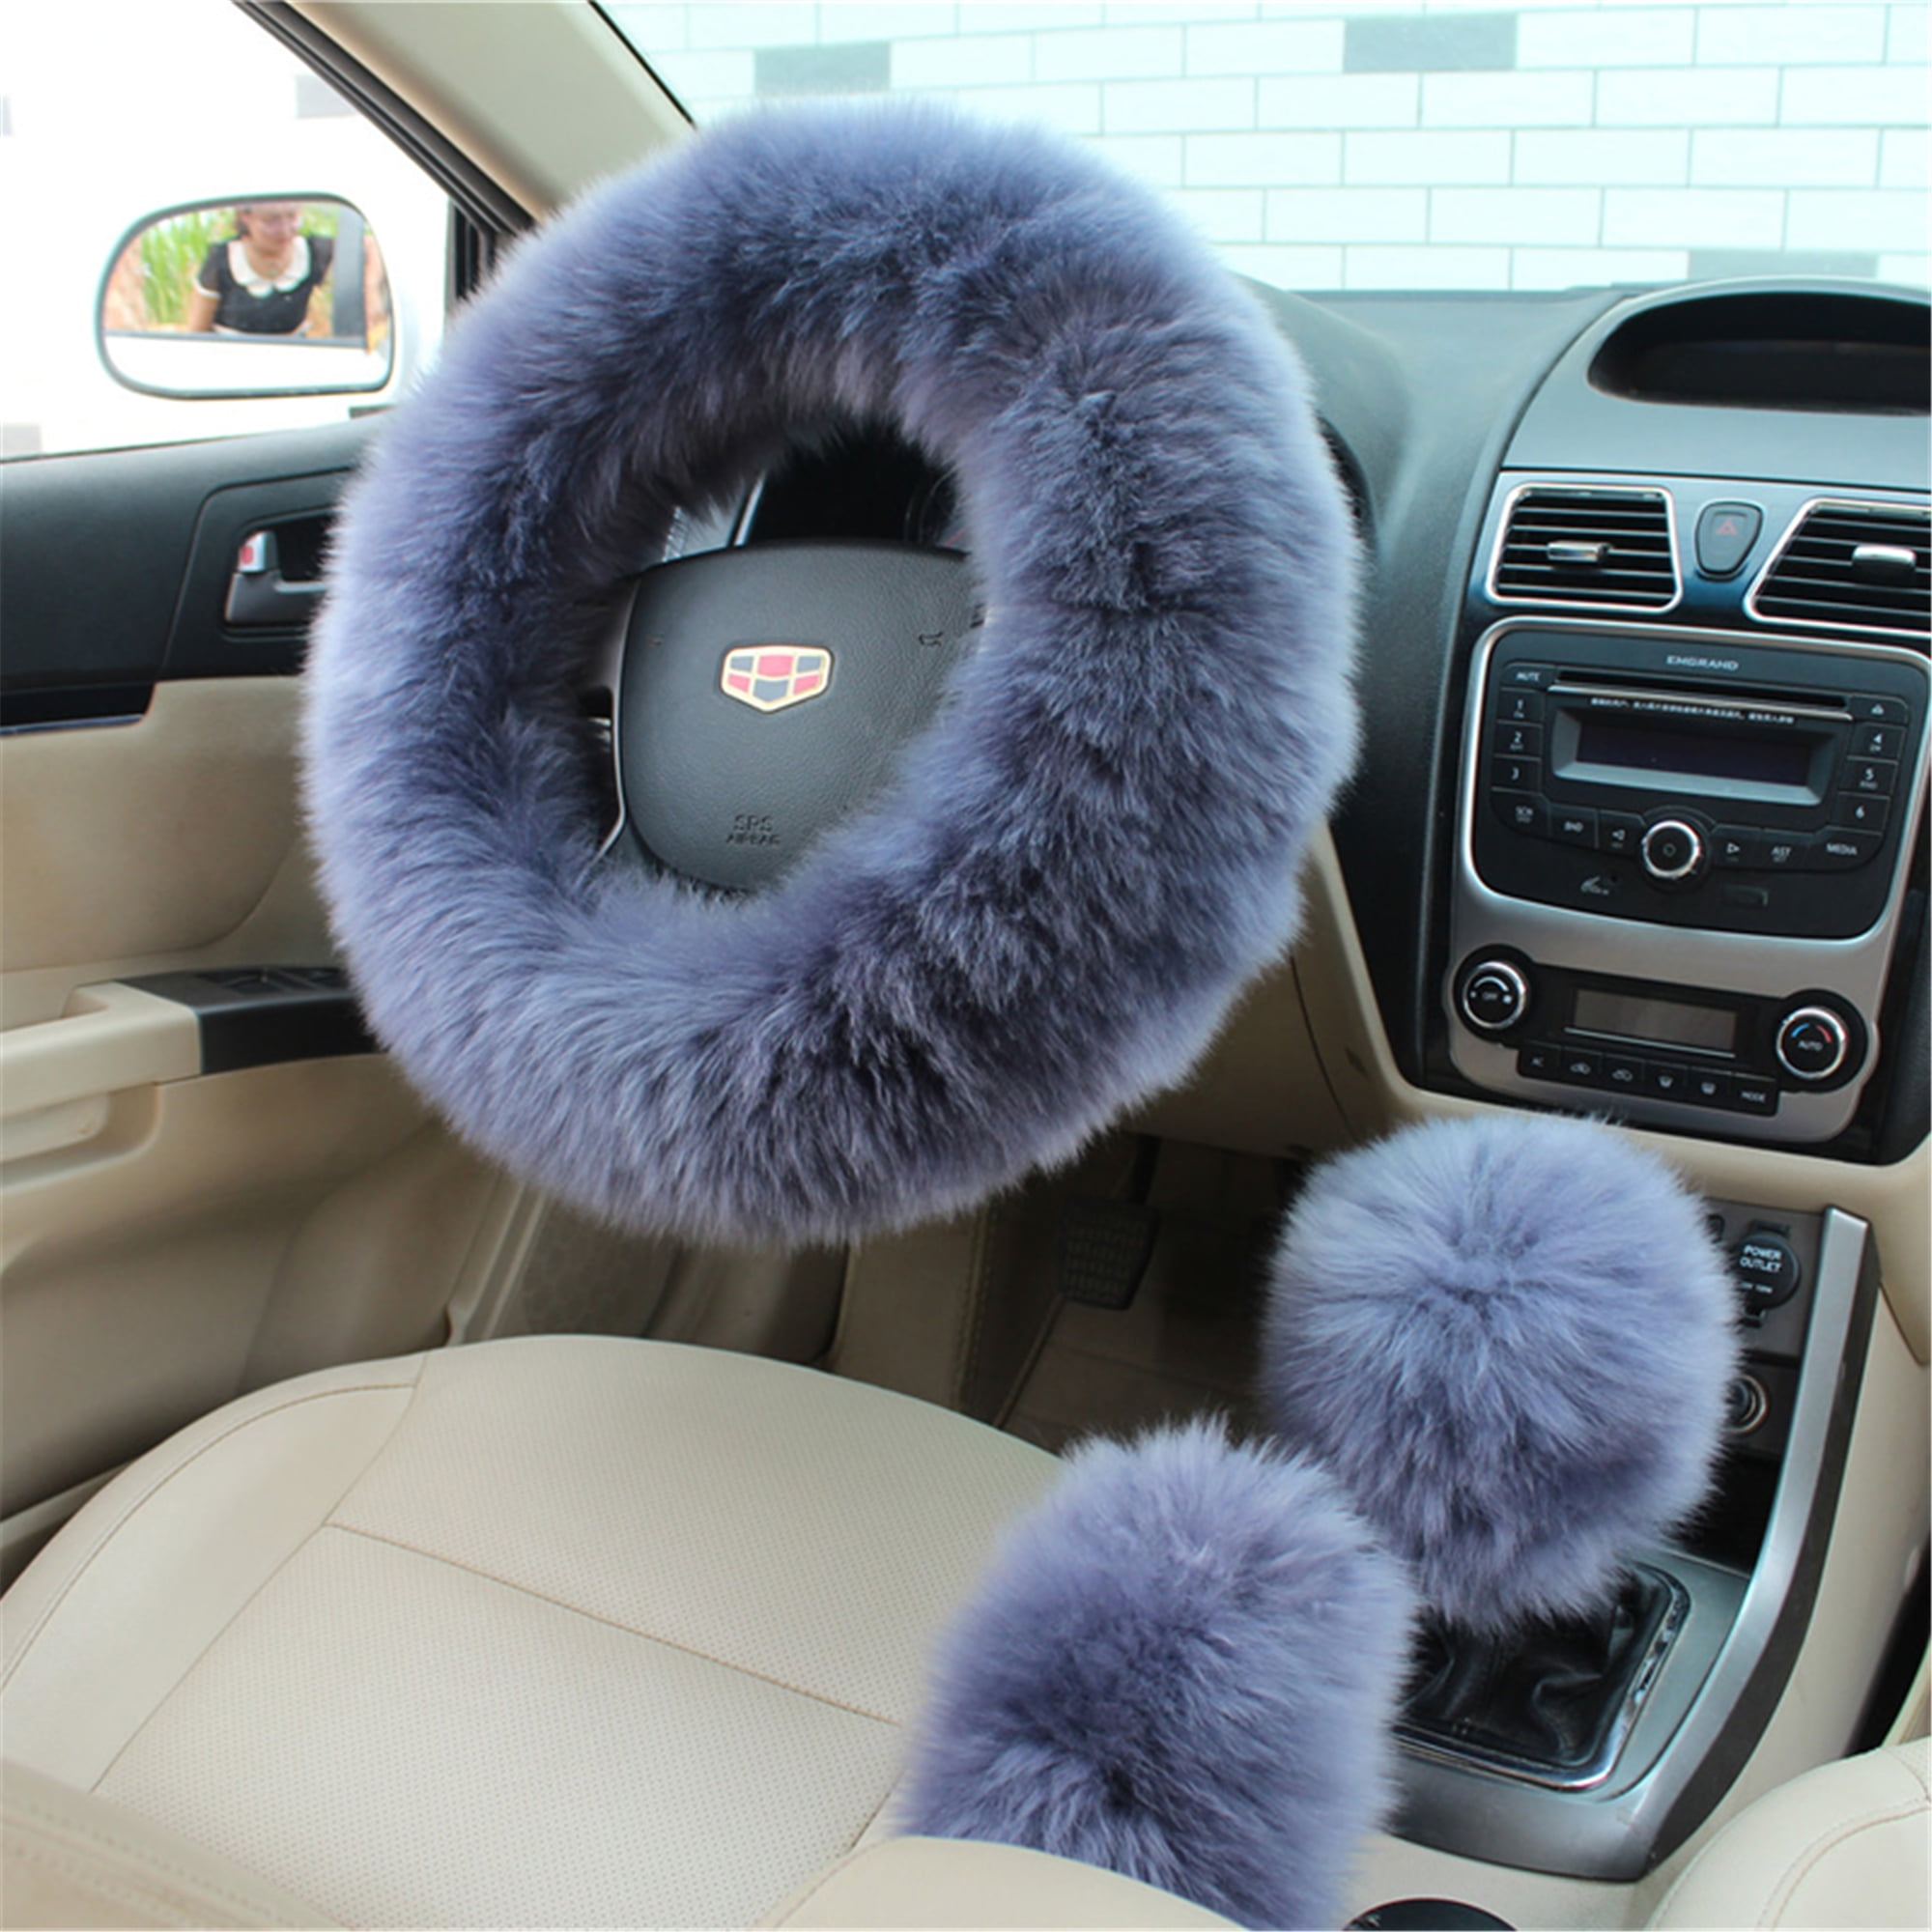 Valleycomfy Fluffy Steering Wheel Cover for Women Fuzzy Steering Wheel Cover Winter Warm Plush Car Wheel Cover Universal Fit 15 Inch Purple 